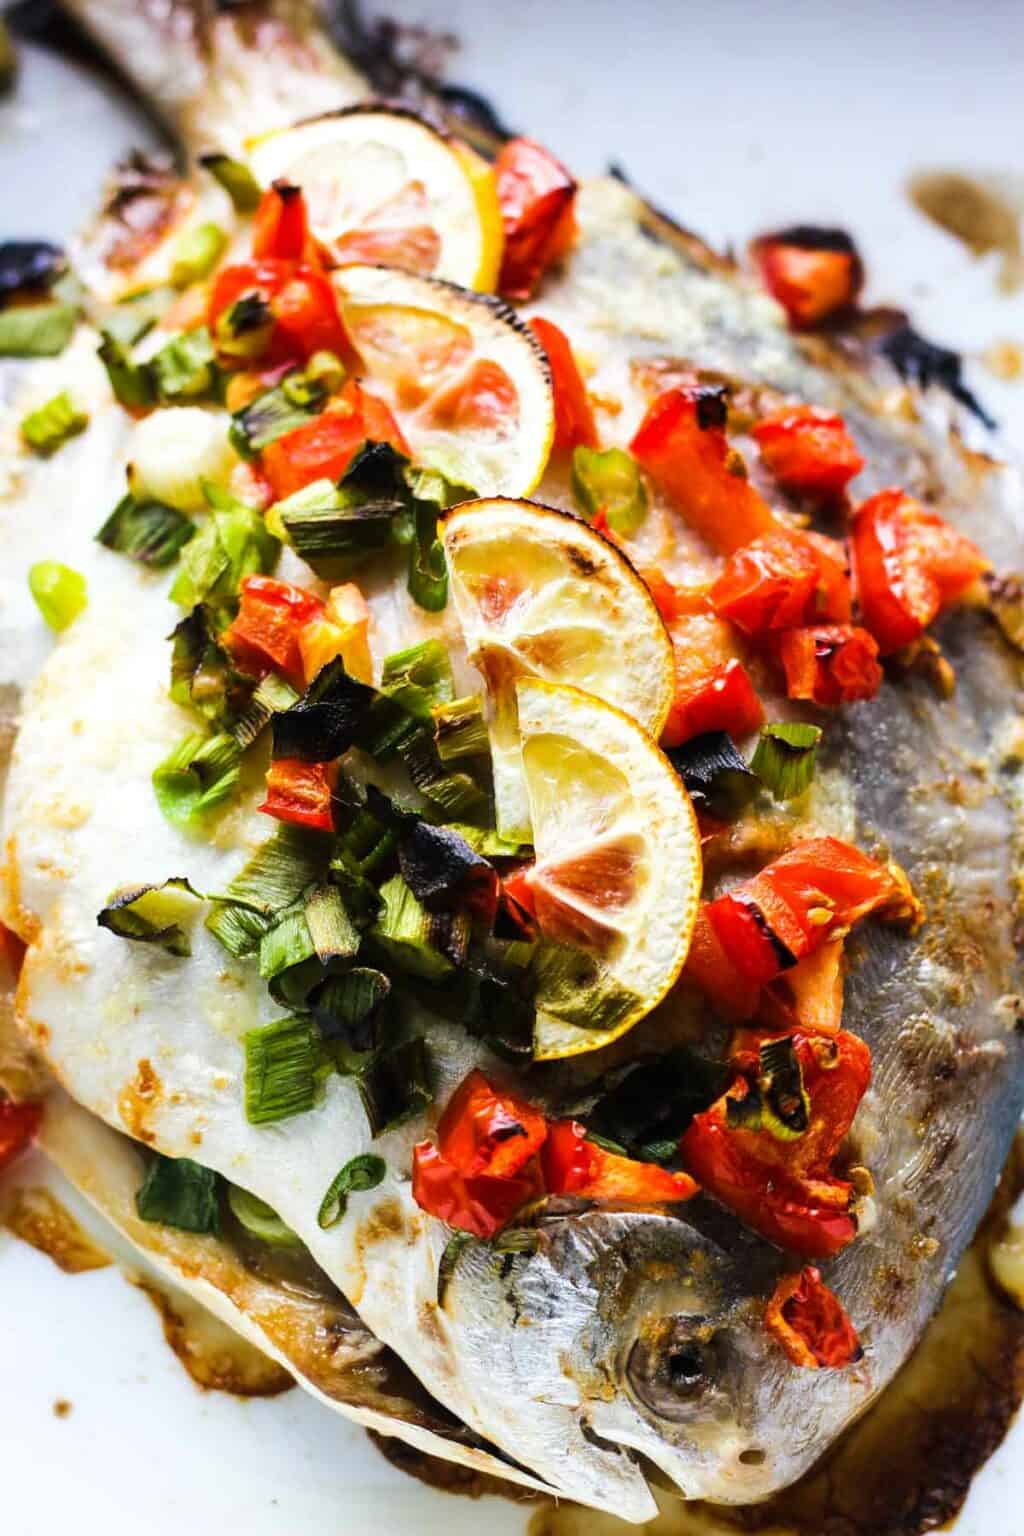 Baked white pomfret recipe - The Top Meal